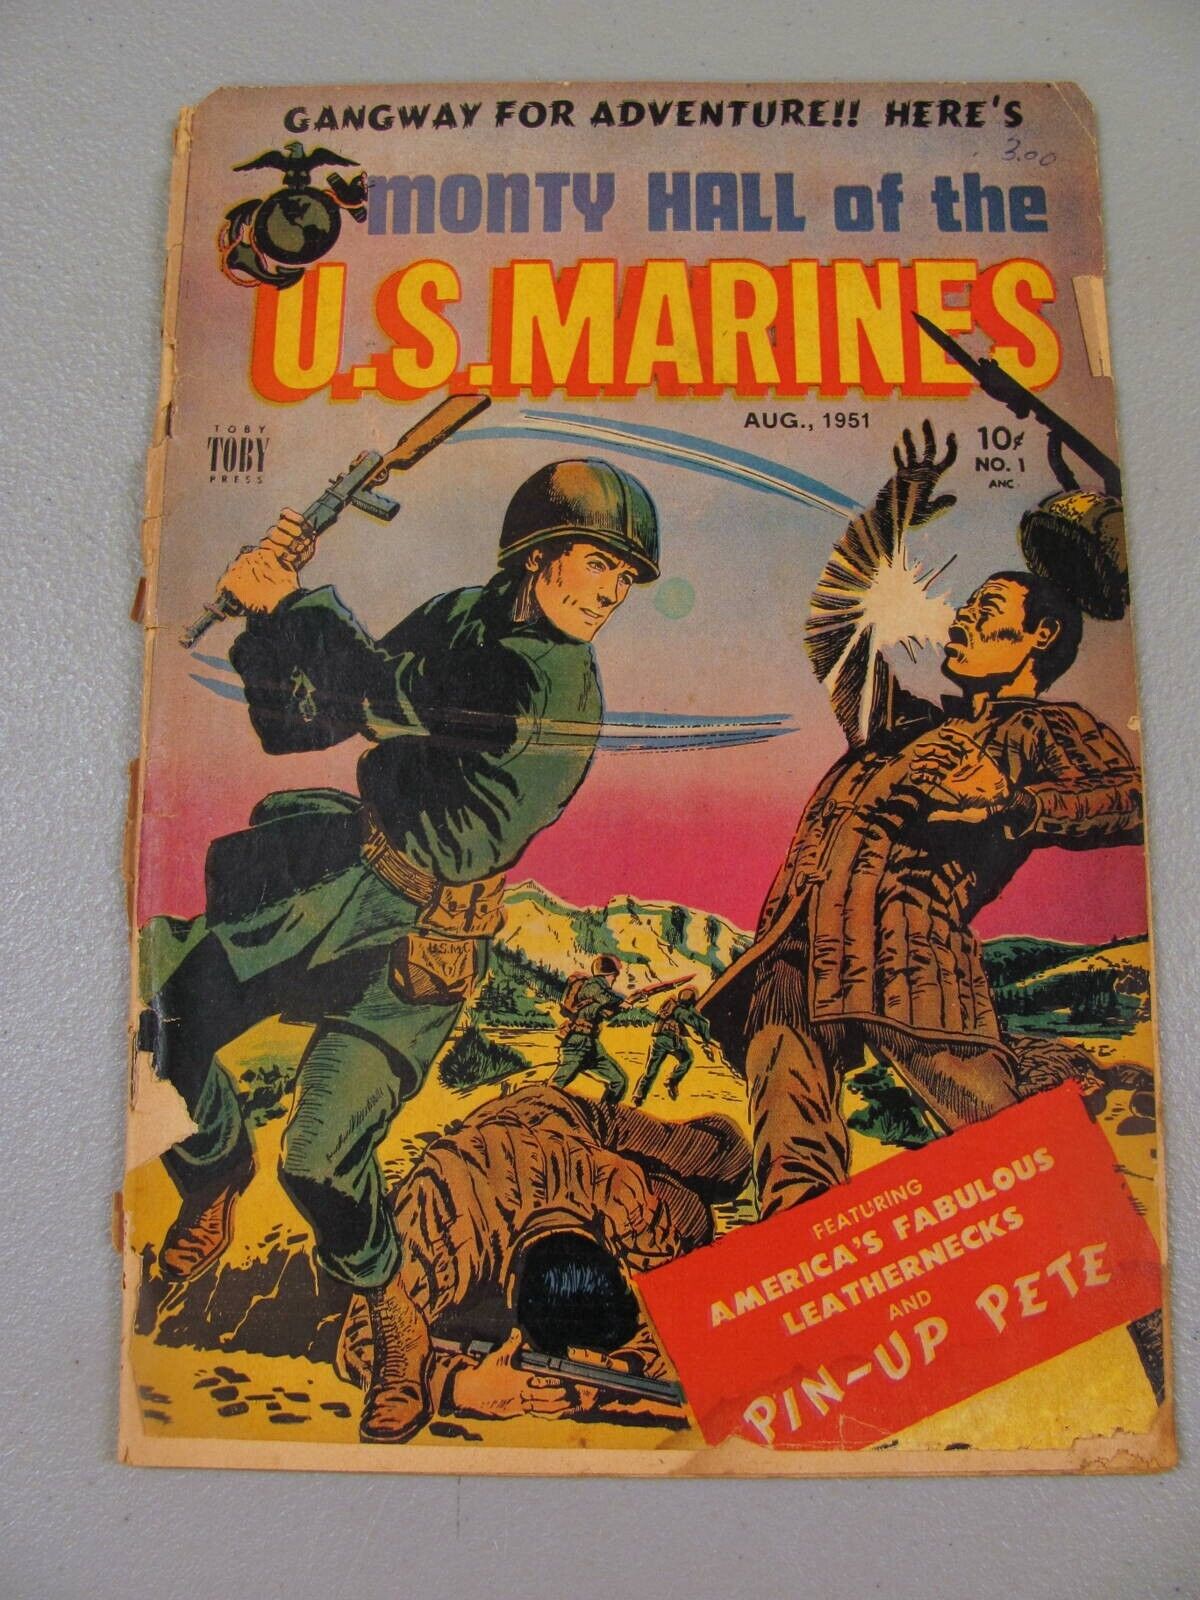 Monty Hall of the U.S. Marines #1 (1951) FR Toby Press detatched cover BIN-4297